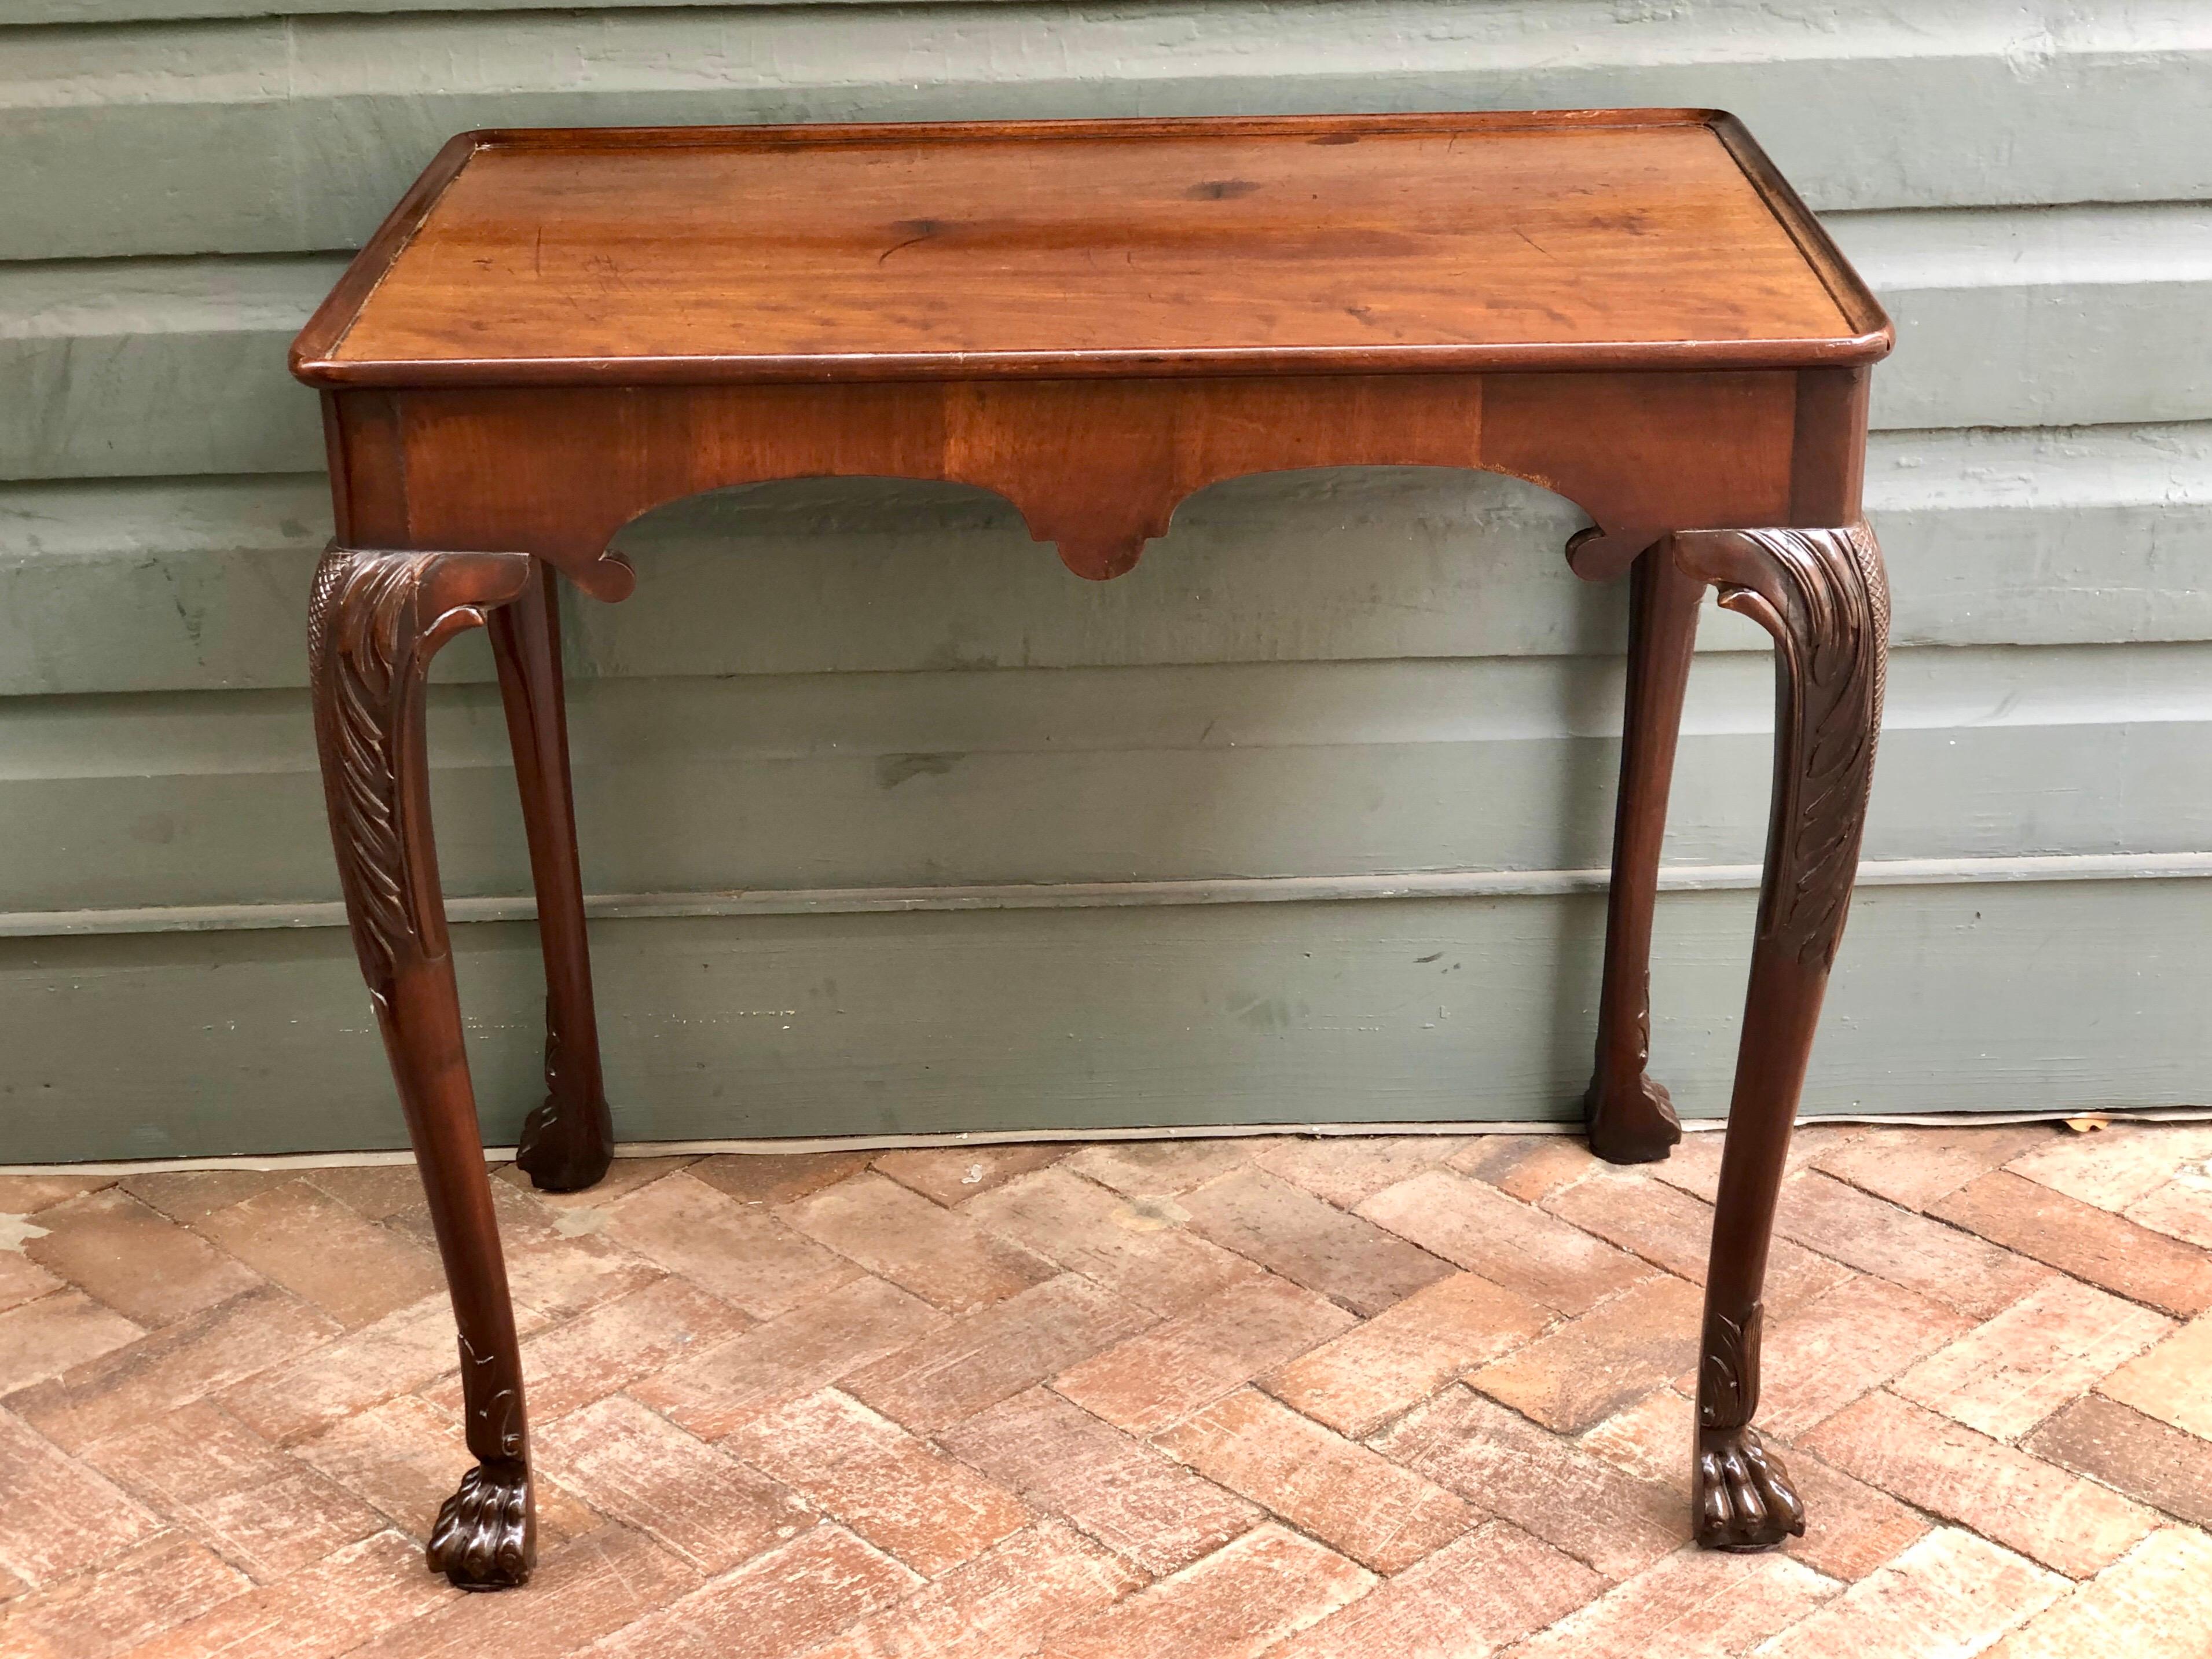 This Irish tea table is made of Cuban mahogany with rich patination in the finest style. The top of the table is one single mahogany board carved to a dish top design. The simplicity of the carved frieze has a sophisticated elegance with its Queen